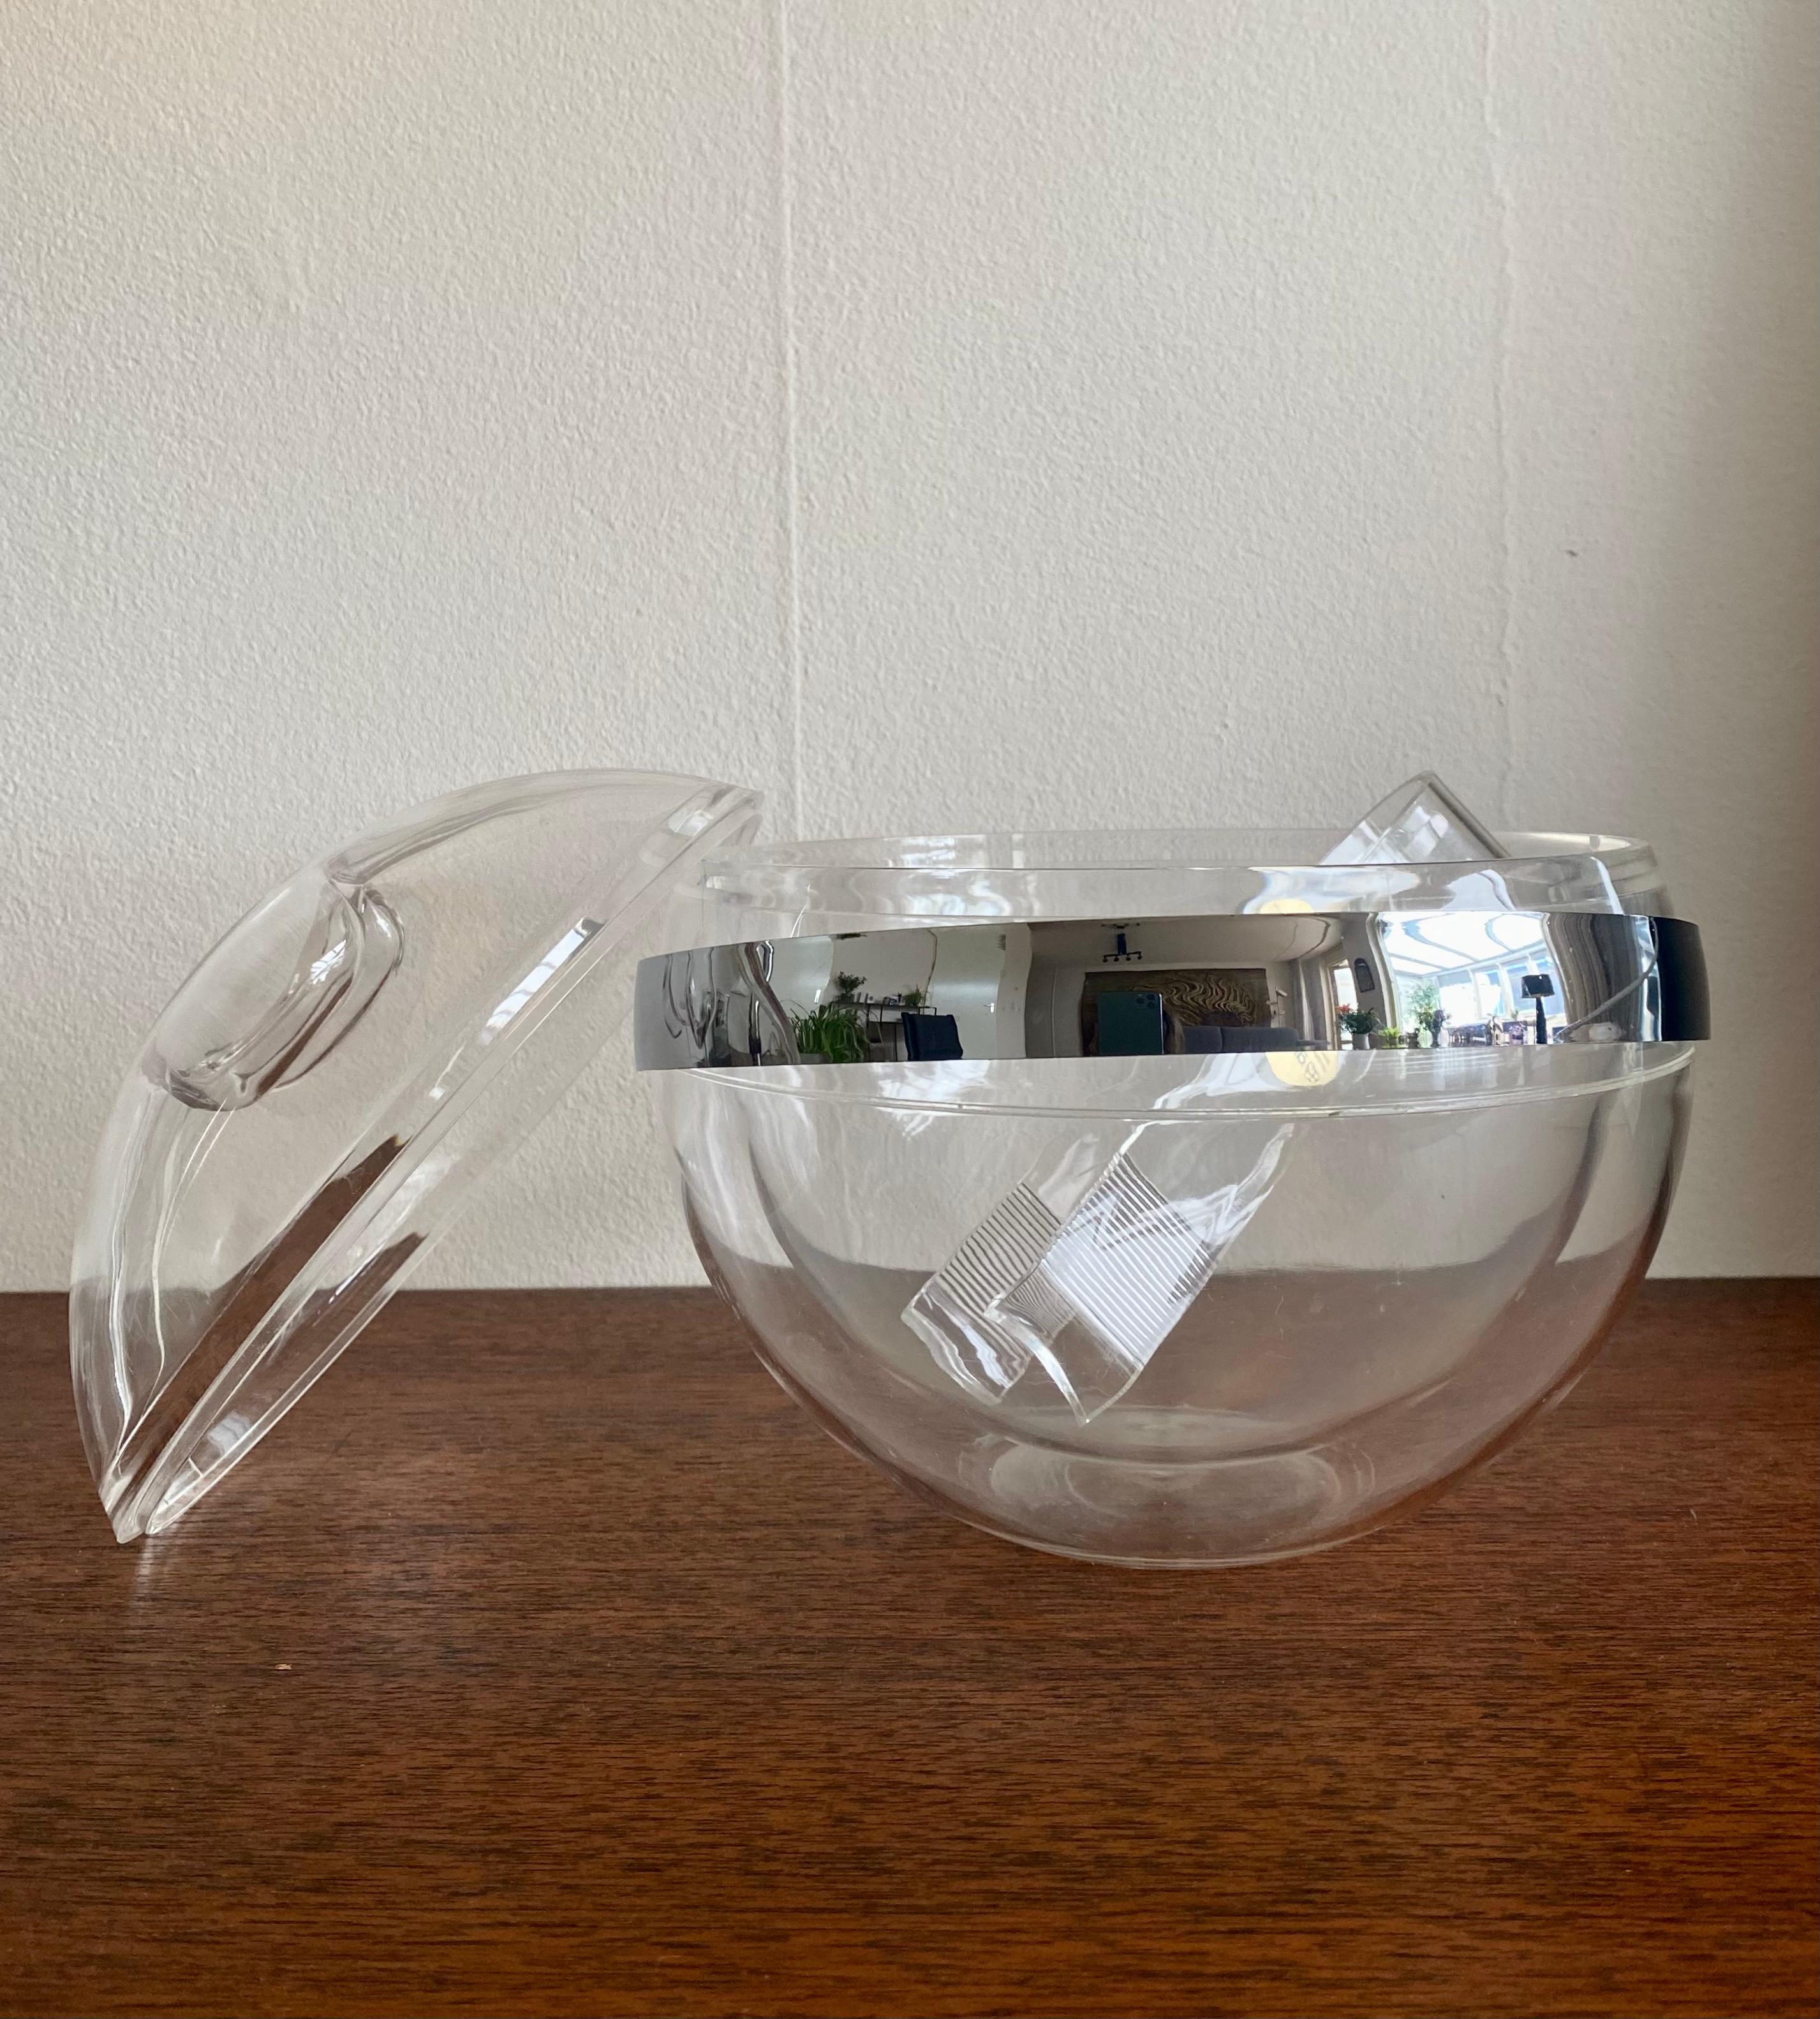 Lucite Space Age Icebucket Model Stella by Paolo Tilche for Guzzini, 1970s For Sale 4